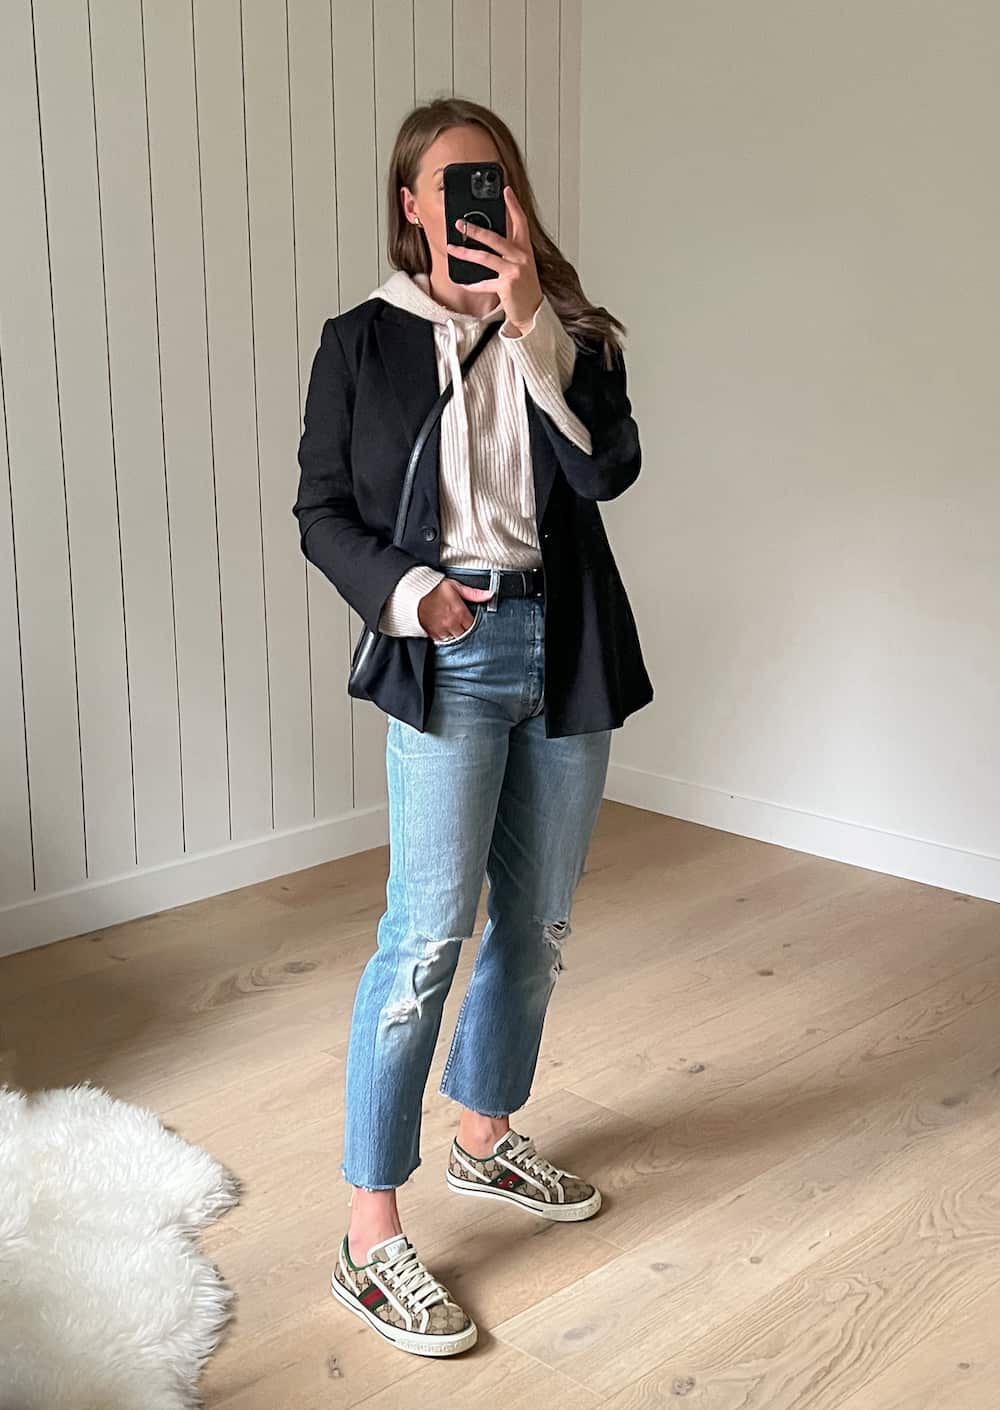 Christal wearing a black blazer over the Jenni kayne cashmere hoodie in oatmeal with blue jeans and beige sneakers